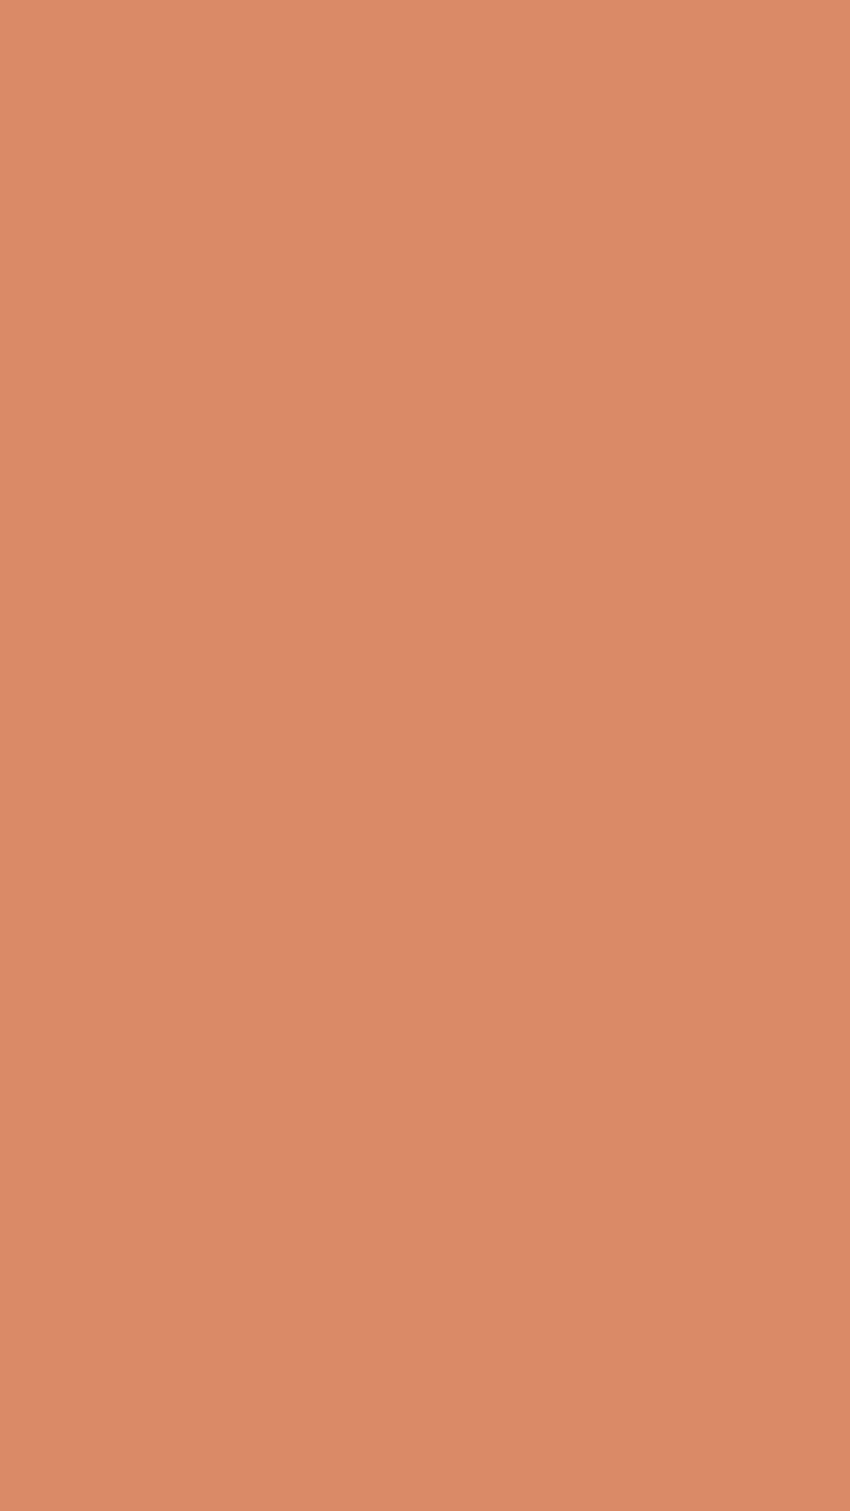 Copper Crayola Solid Color Backgrounds for Mobile Phone, solid color phone HD phone wallpaper